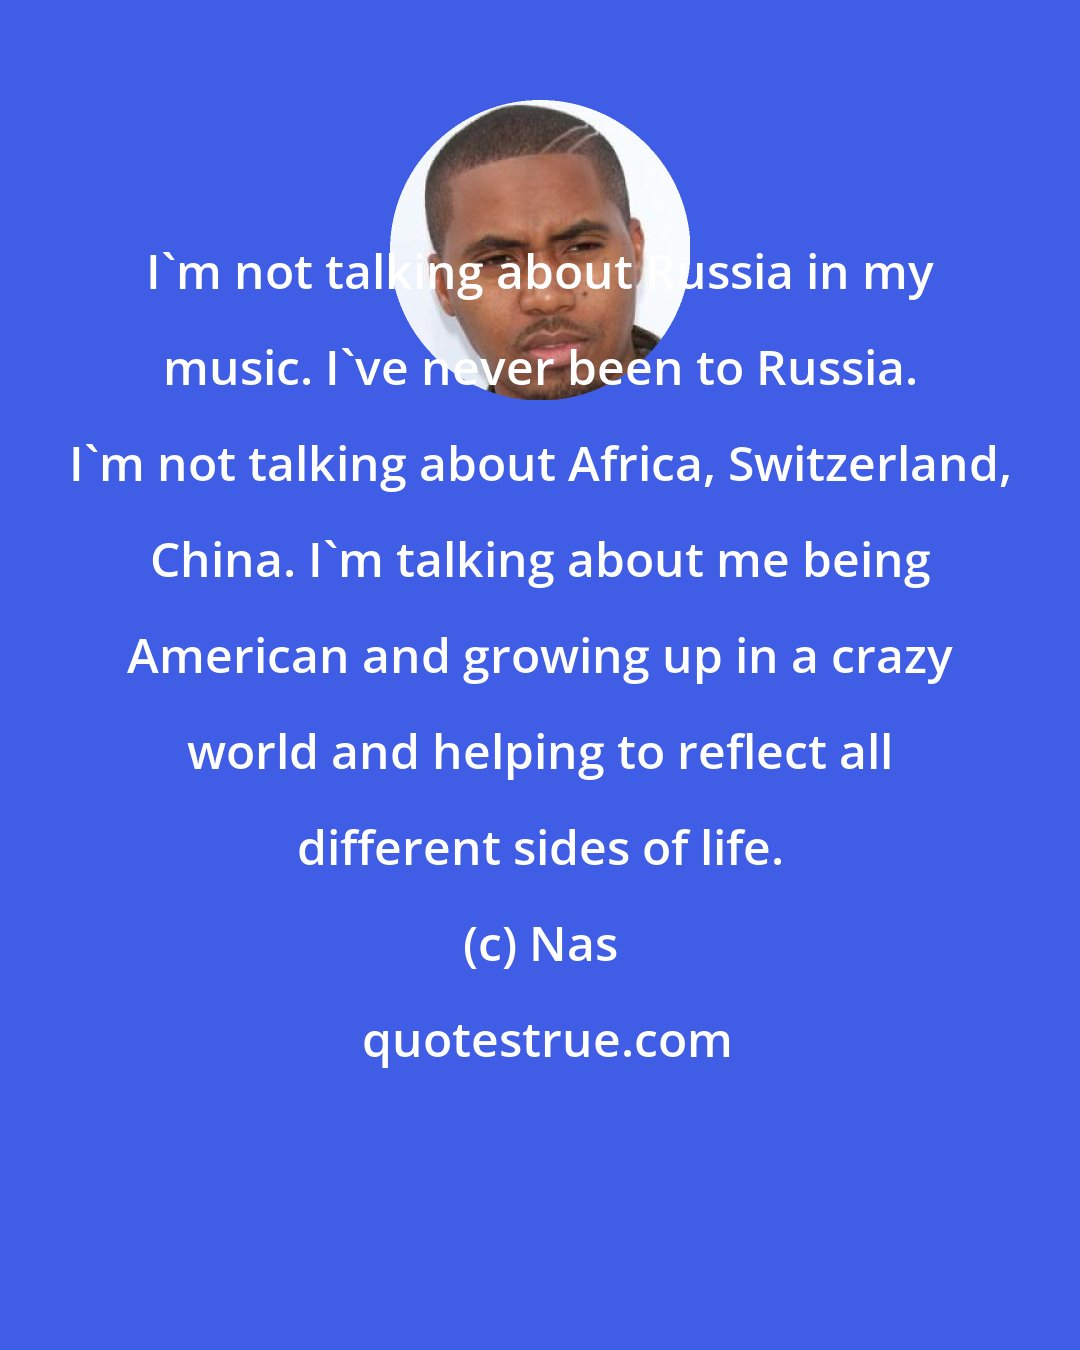 Nas: I'm not talking about Russia in my music. I've never been to Russia. I'm not talking about Africa, Switzerland, China. I'm talking about me being American and growing up in a crazy world and helping to reflect all different sides of life.